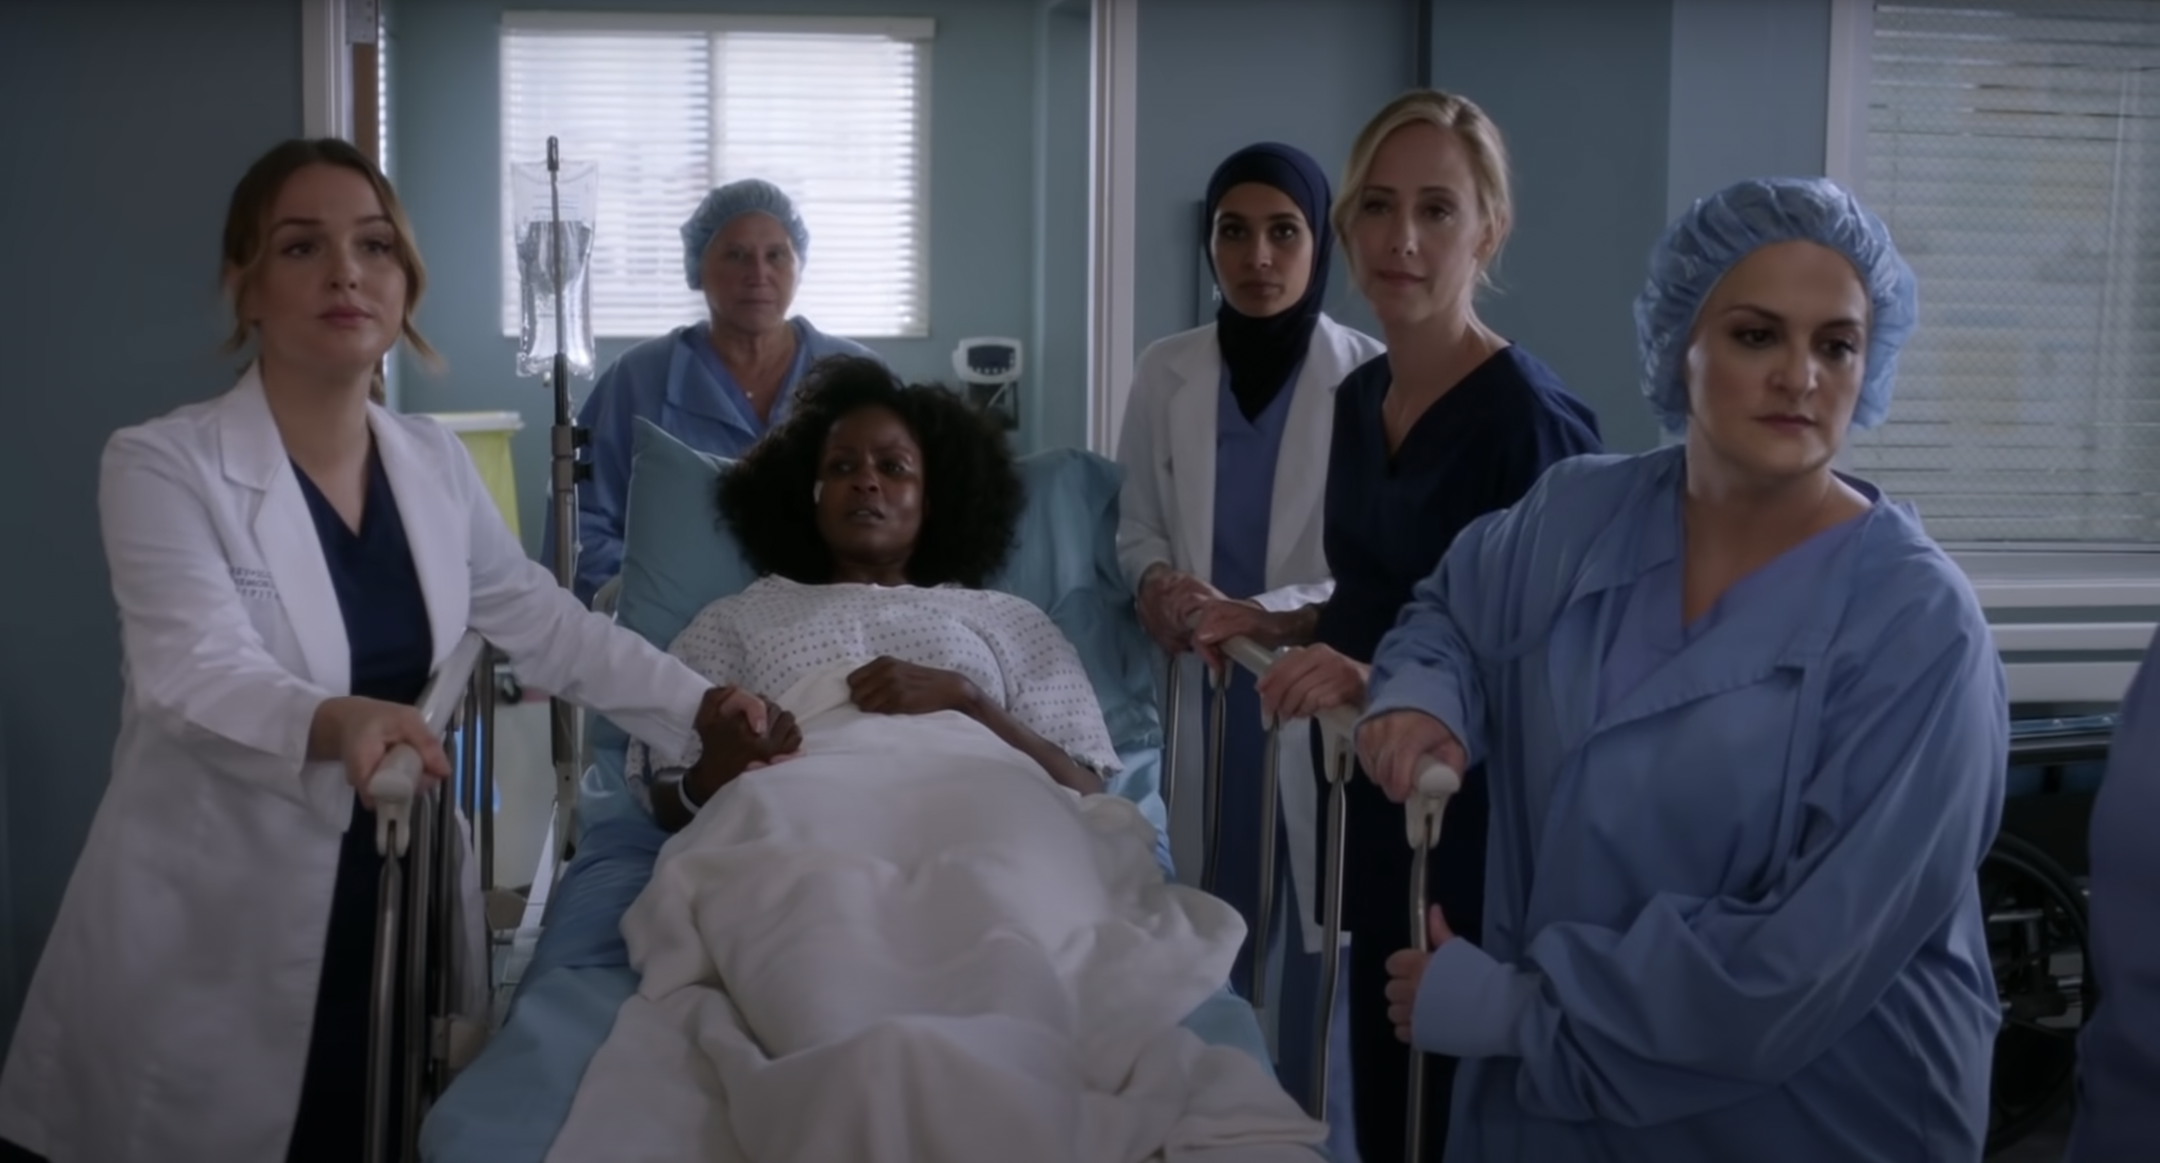 TV writer Elisabeth Finch (right) as a nurse on a 2019 episode of “Grey’s Anatomy,” which she wrote allegedly inspired by her experiences as a sexual assault survivor. Recently unearthed details have cast doubt on many of Finch’s stories about her own trauma, including her claim that she had helped clean up a friend’s remains from the Tree of Life shooting. (Screenshot via ABC)